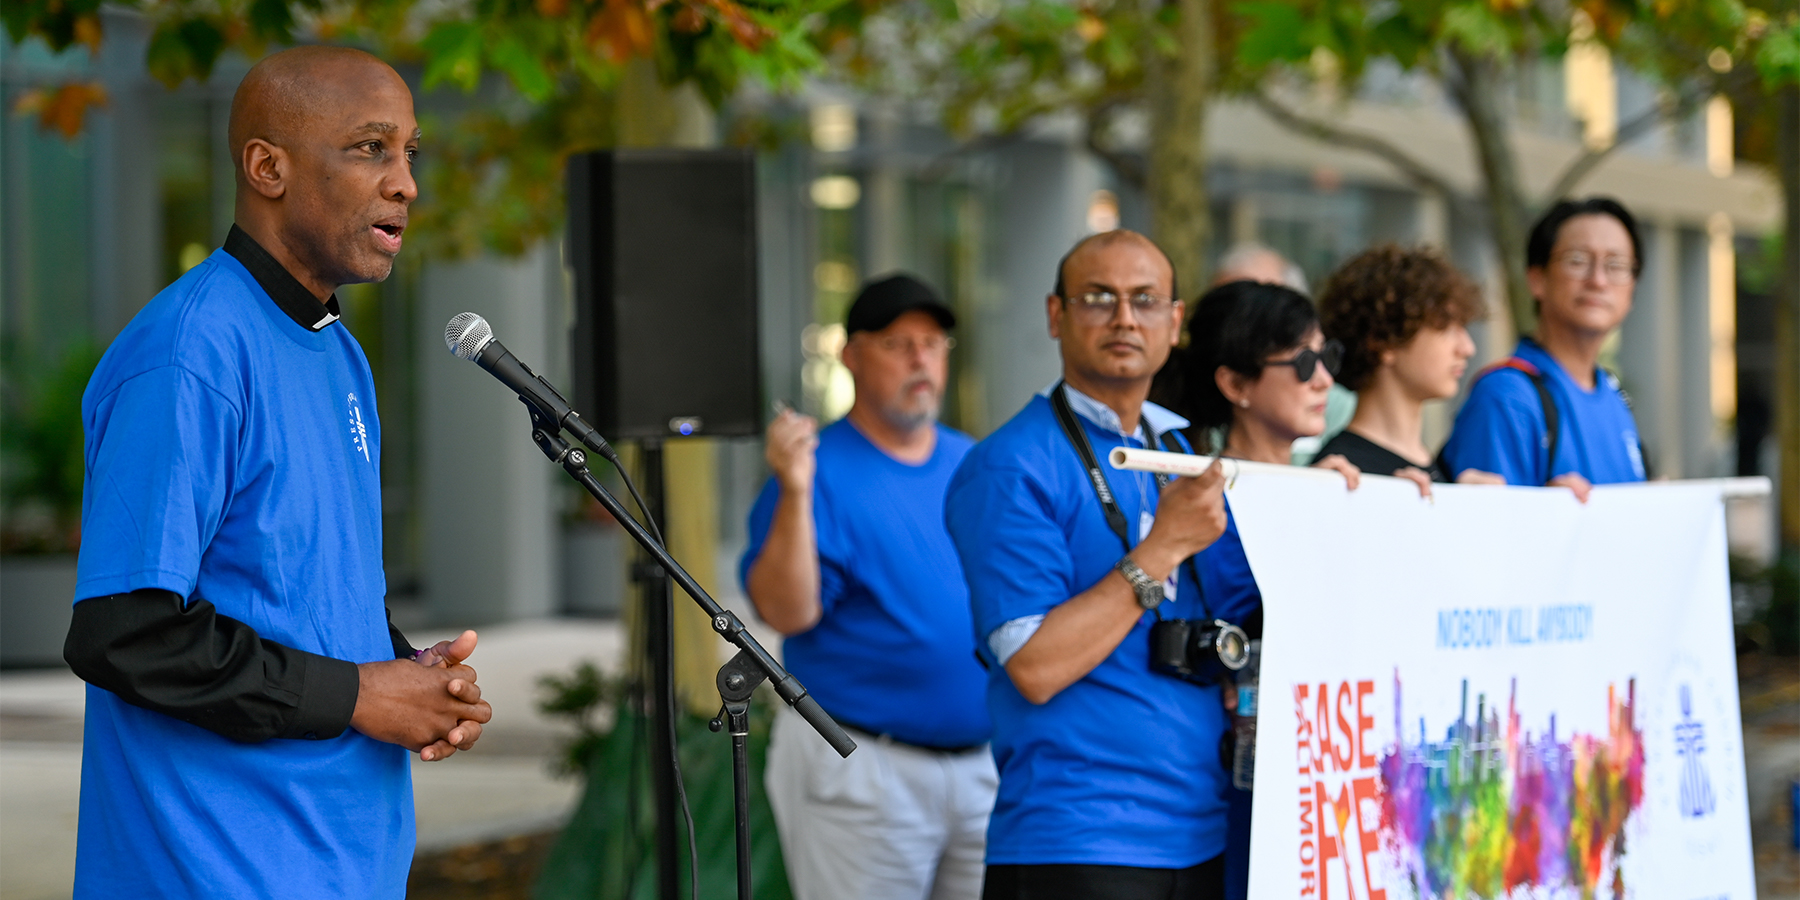 Stated Clerk of the General Assembly, the Rev. J. Herbert Nelson II, speaks at the Ceasefire Walk on August 2, 2019 at Big Tent in Baltimore. (Photo by Rich Copley)